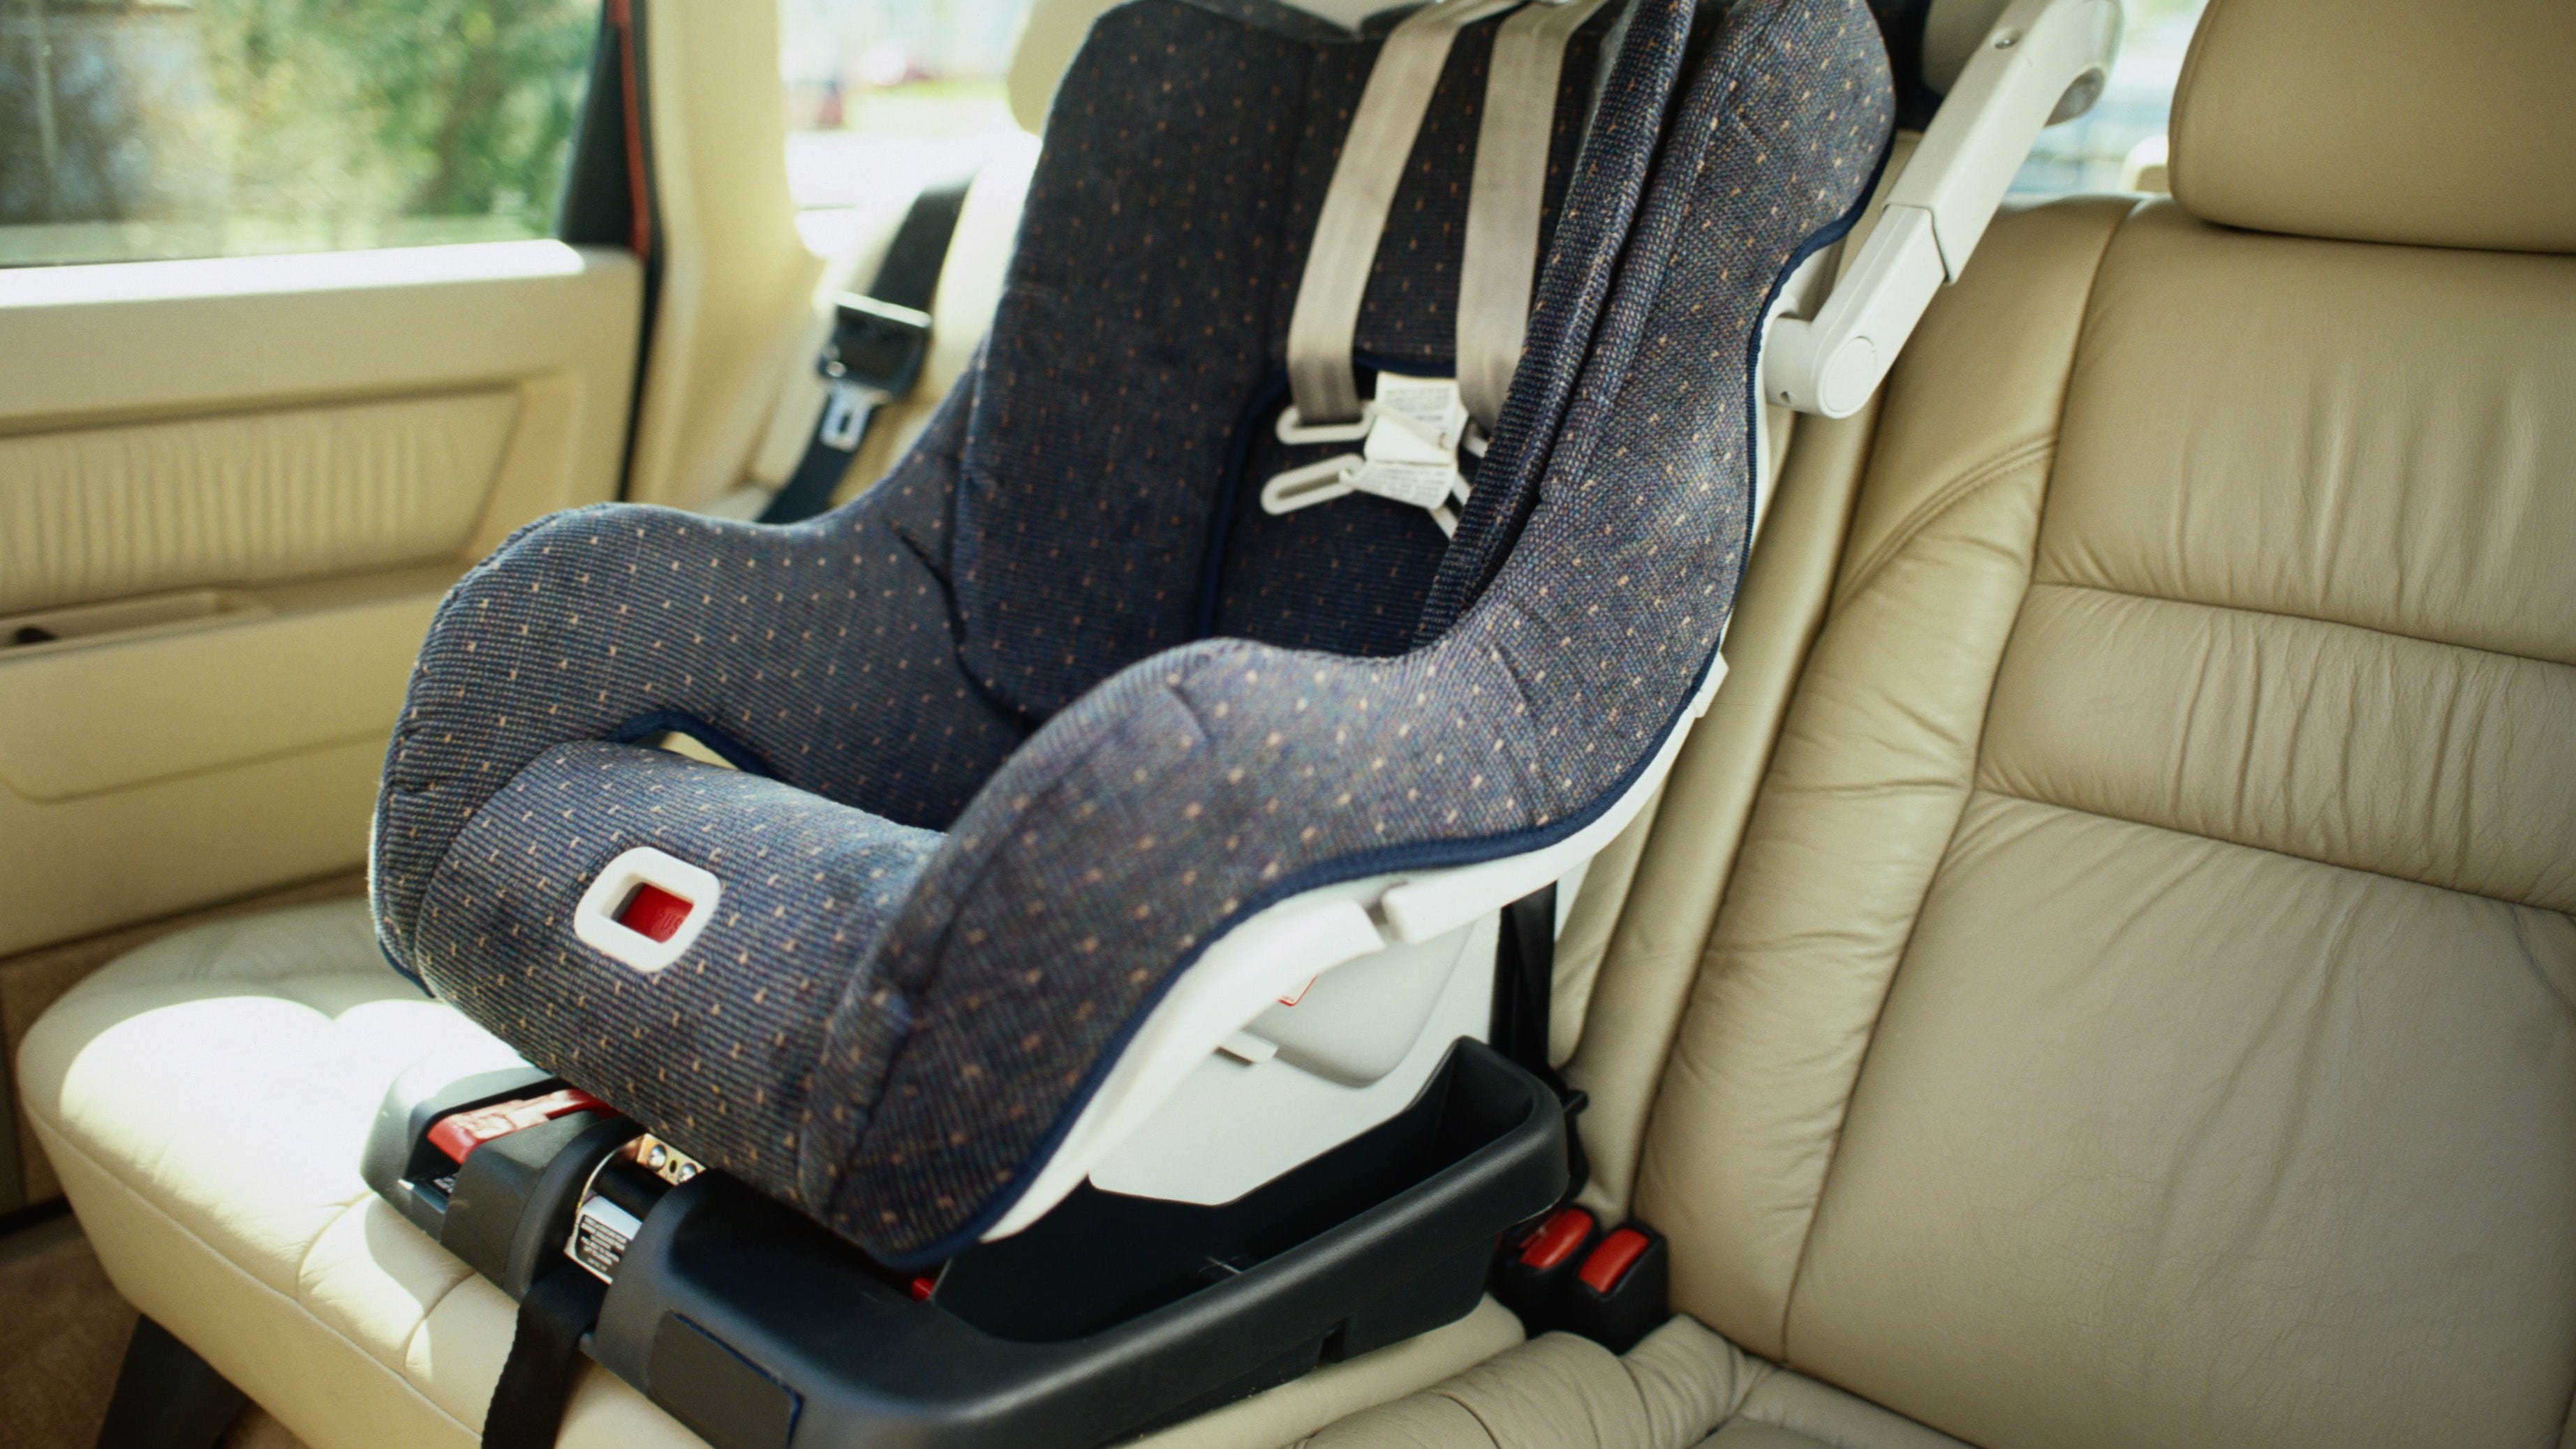 New Aap Car Seat Safety Guidelines, What Are The Regulations For Forward Facing Car Seats